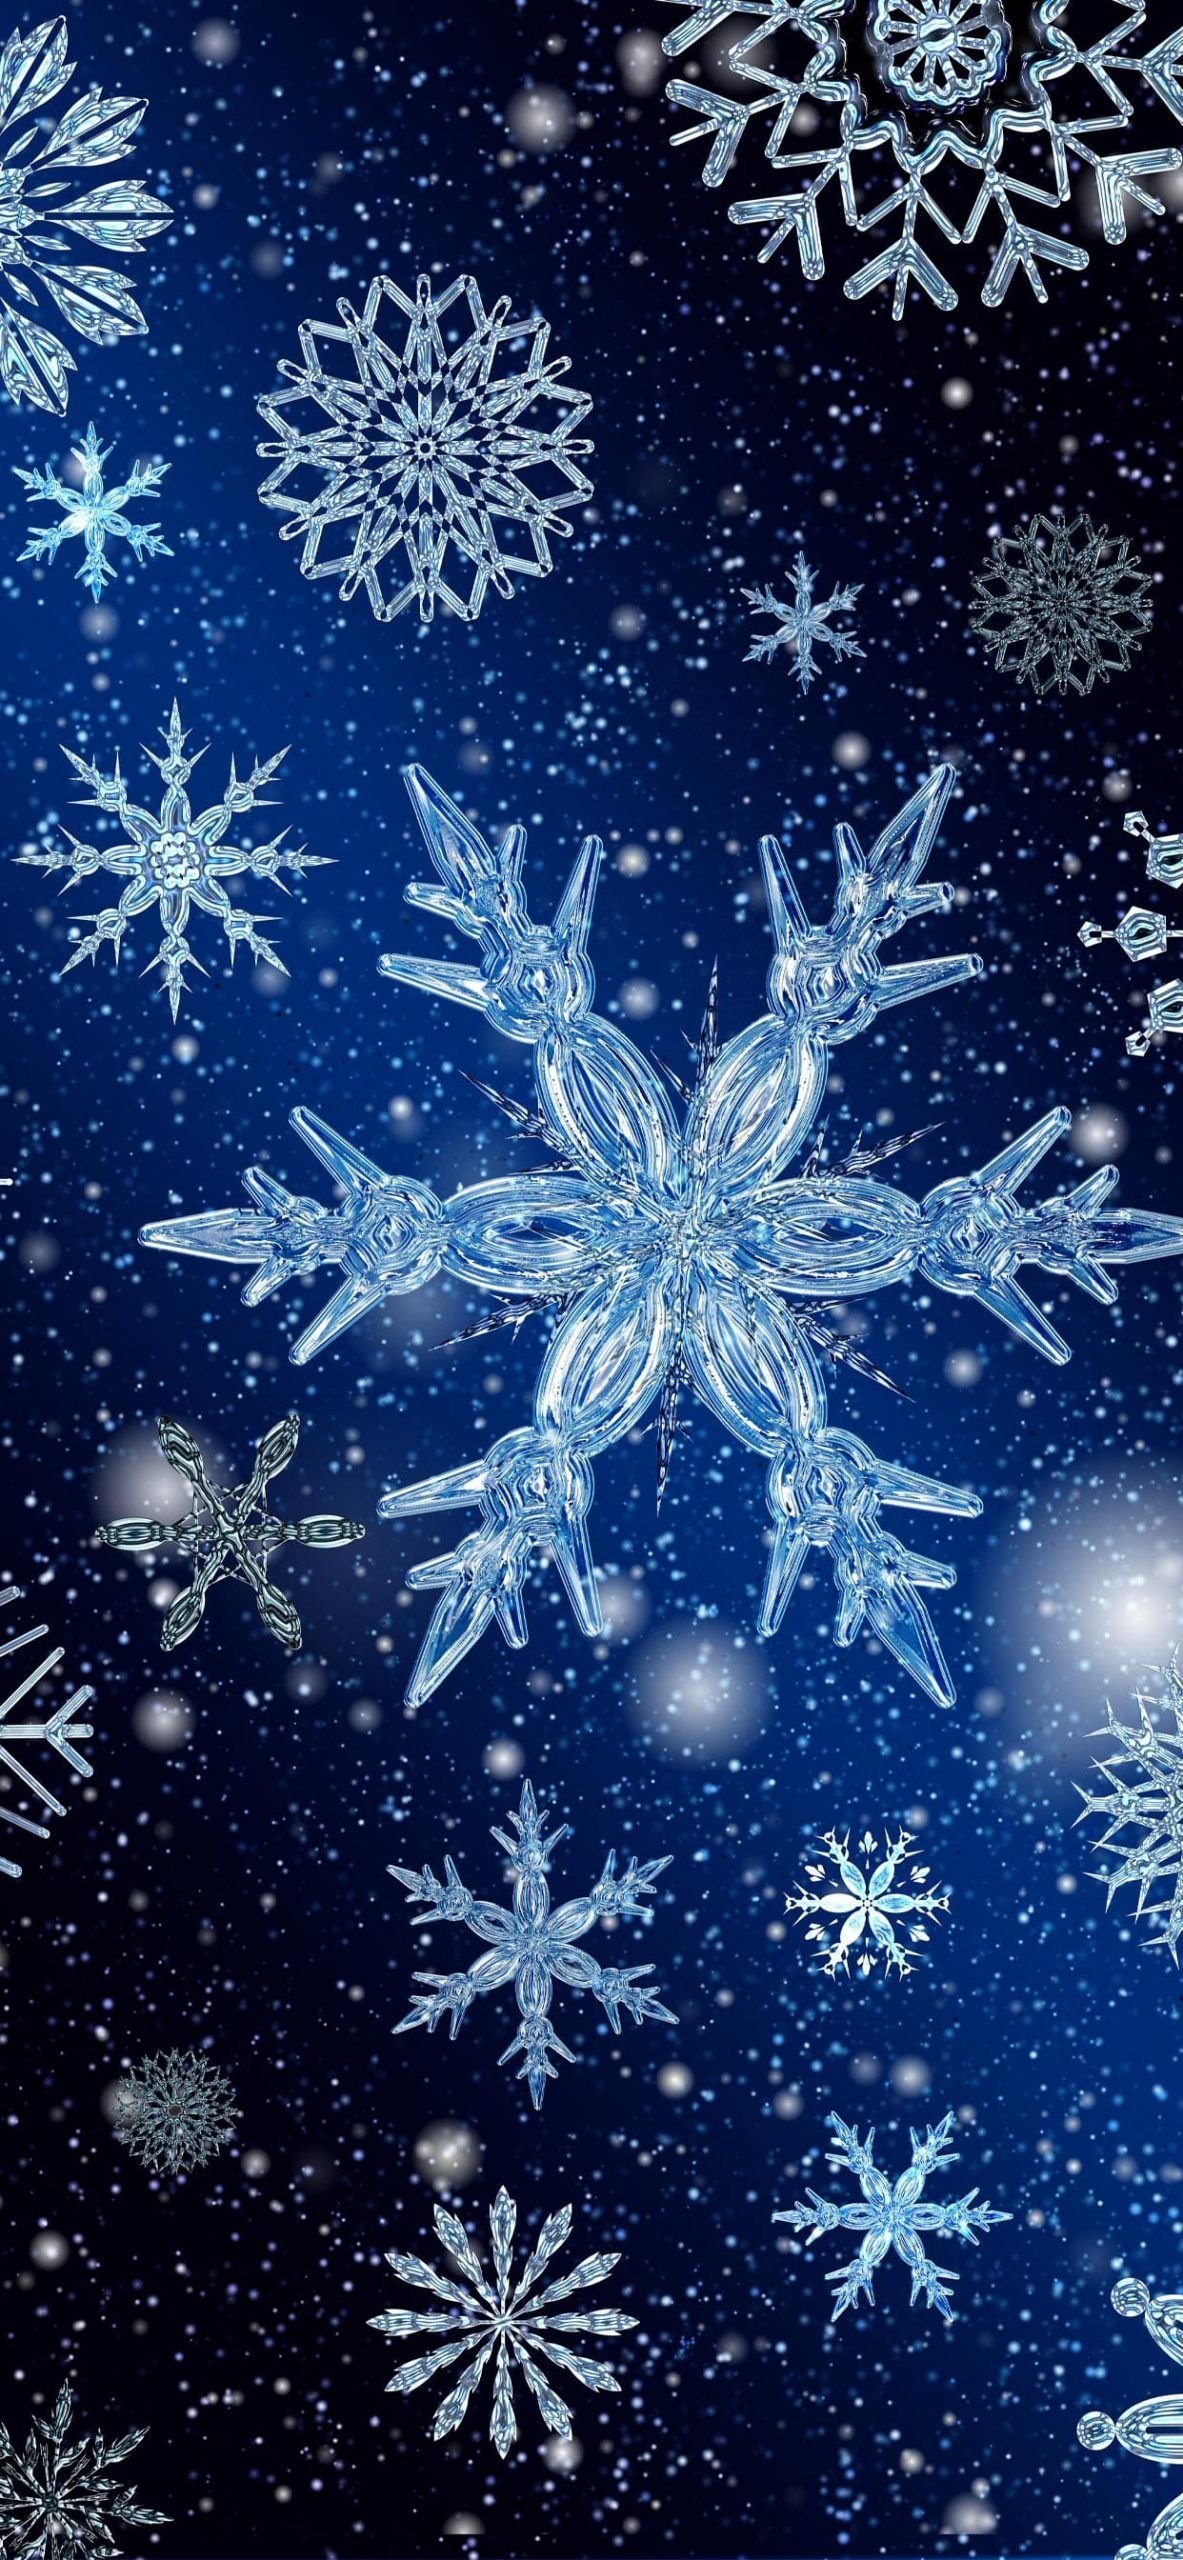 A wallpaper of snowflakes on a blue background - Snowflake